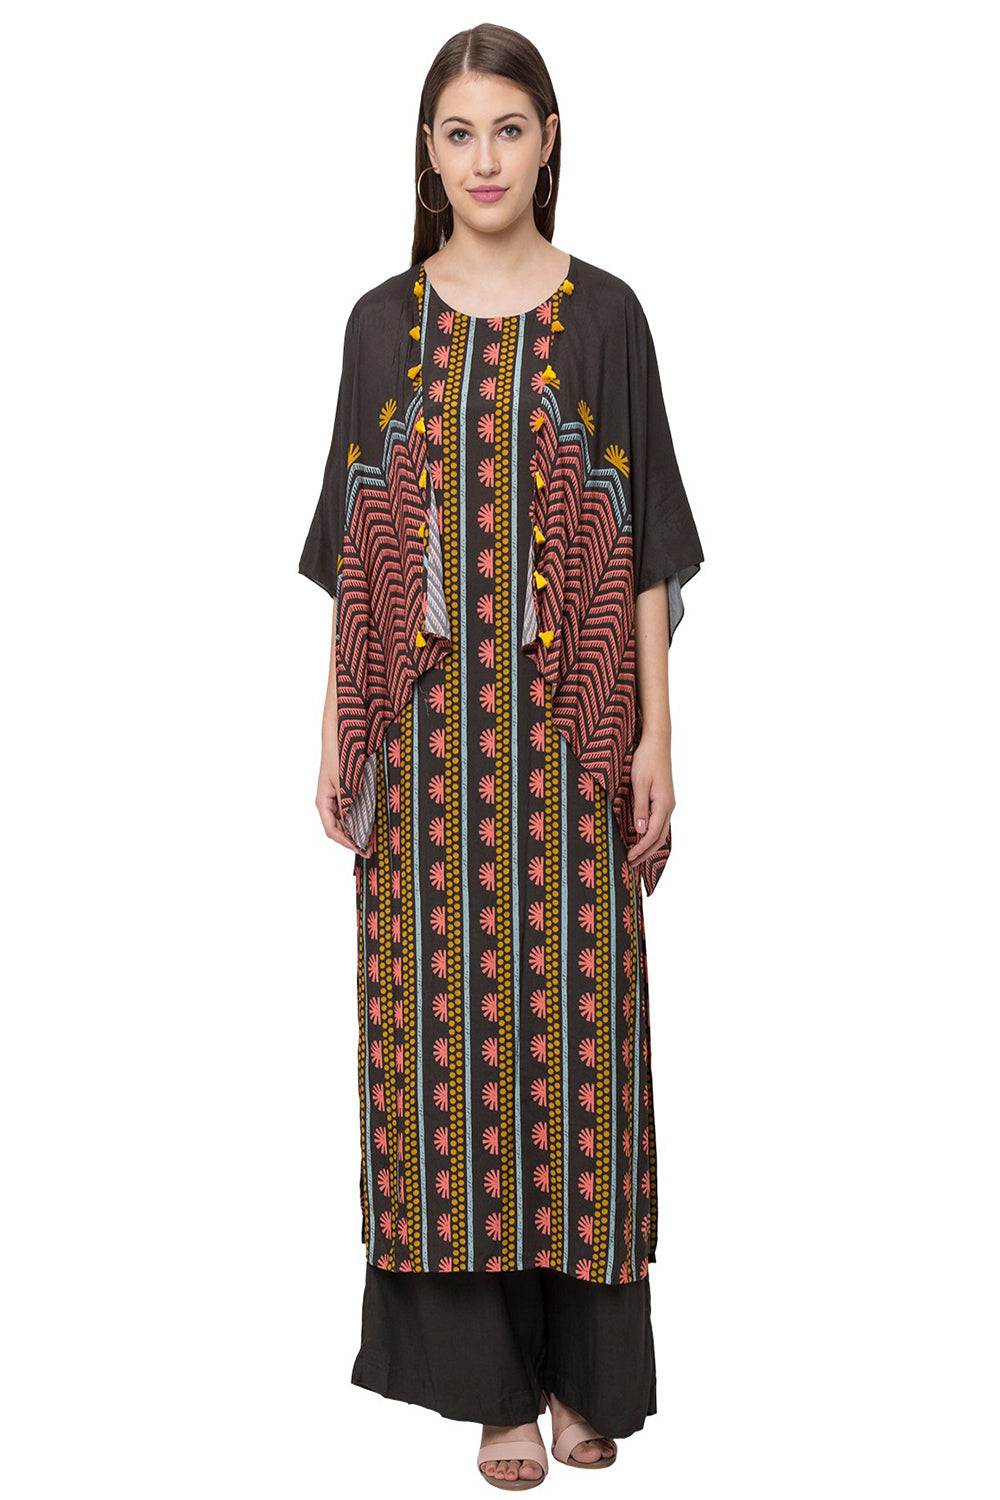 Floral Printed Long Sleeveless Top And Plain Pants Paired With Kaftaan Jacket